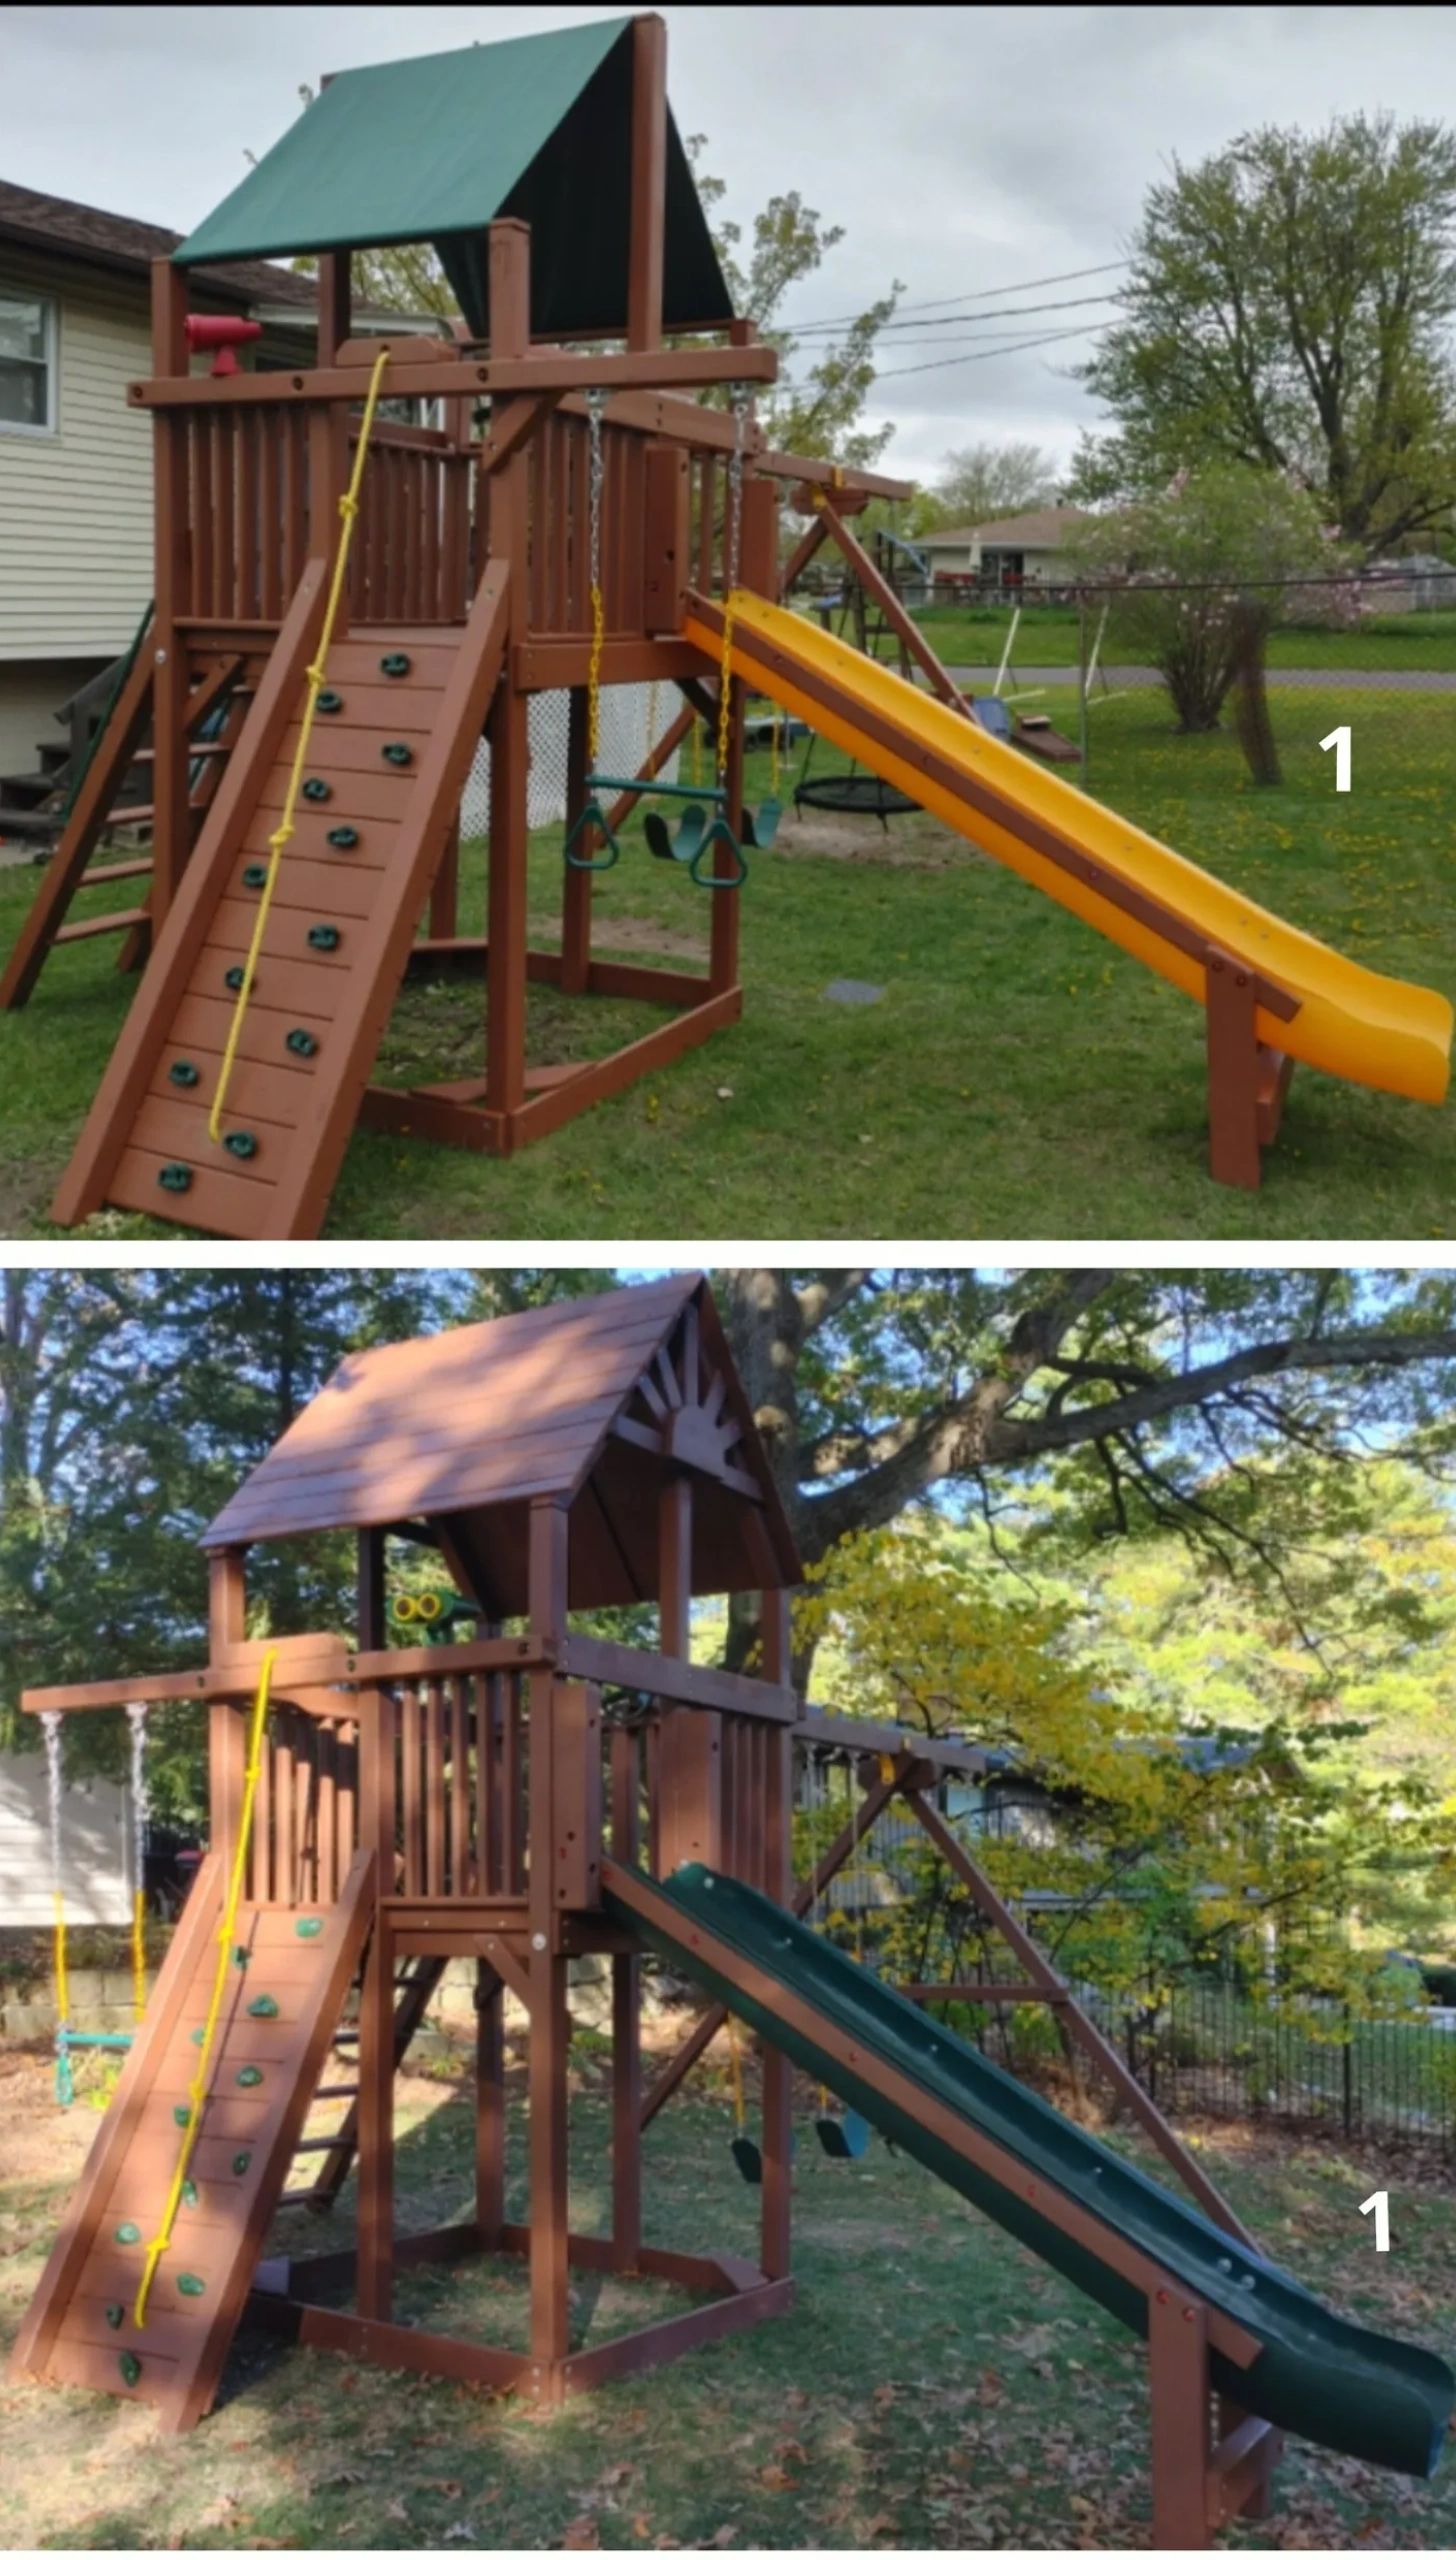 Rainbow Swingsets Playsets Ground Play Sets Swing - Illinois Playsets